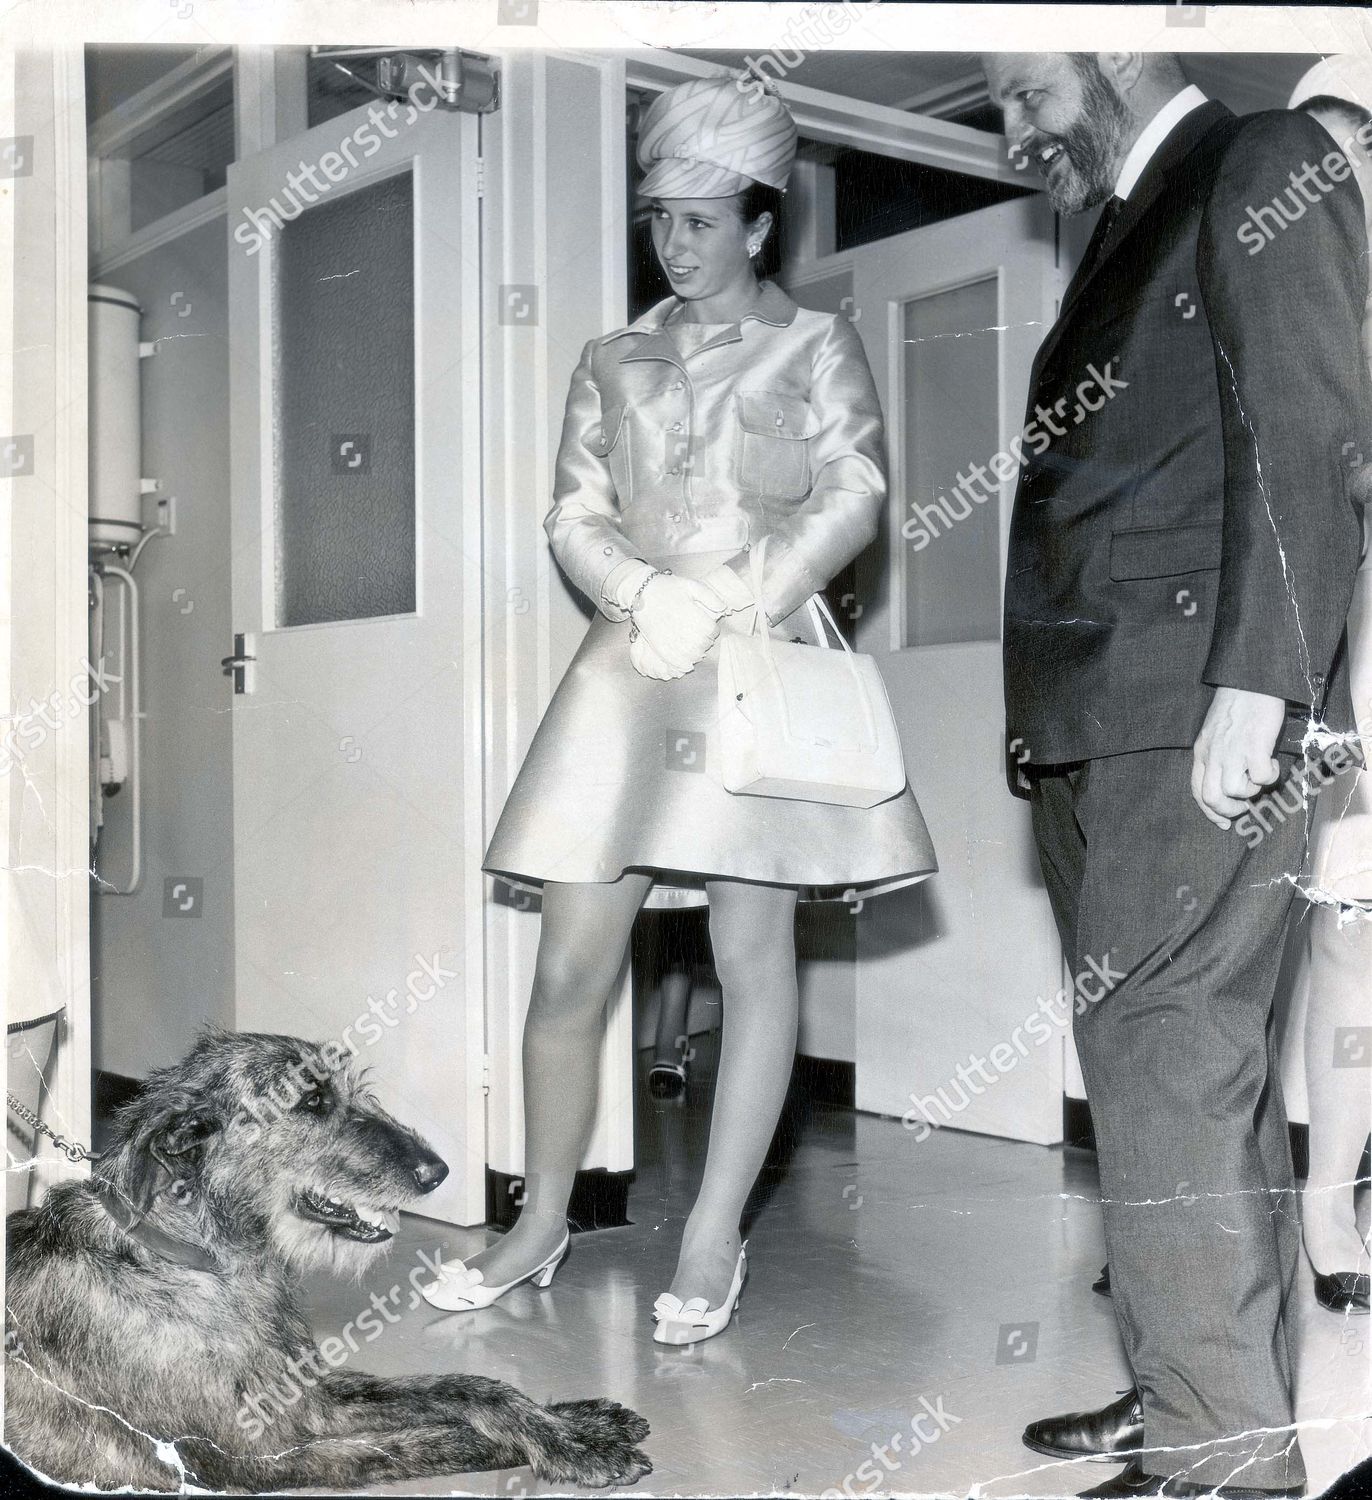 princess-anne-now-princess-royal-july-1969-princess-anne-touring-the-animal-centre-honey-the-irih-wolfhound-who-has-given-60-pints-of-blood-for-other-dogs-met-princess-anne-yesterday-honey-sat-down-and-gravely-offered-a-paw-the-left-one-princess-shutterstock-editorial-891858a.jpg